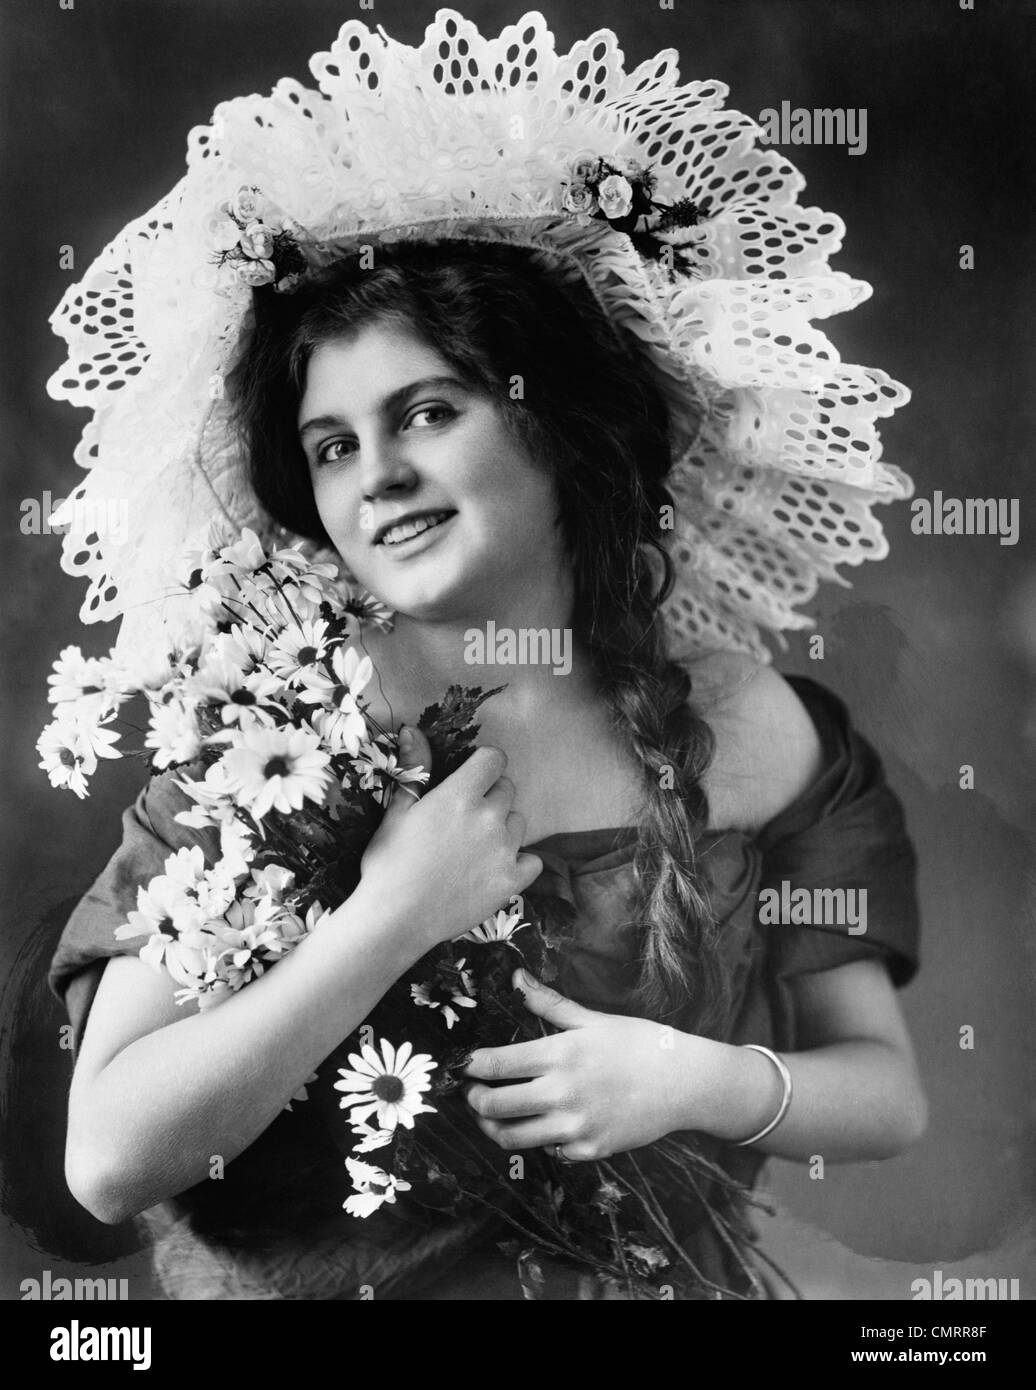 1900s 1910s TURN OF THE CENTURY WOMAN WITH LONG BRAIDS WEARING FANCY LACE HAT & HOLDING BOUQUET OF BLACK-EYED SUSAN FLOWERS Stock Photo